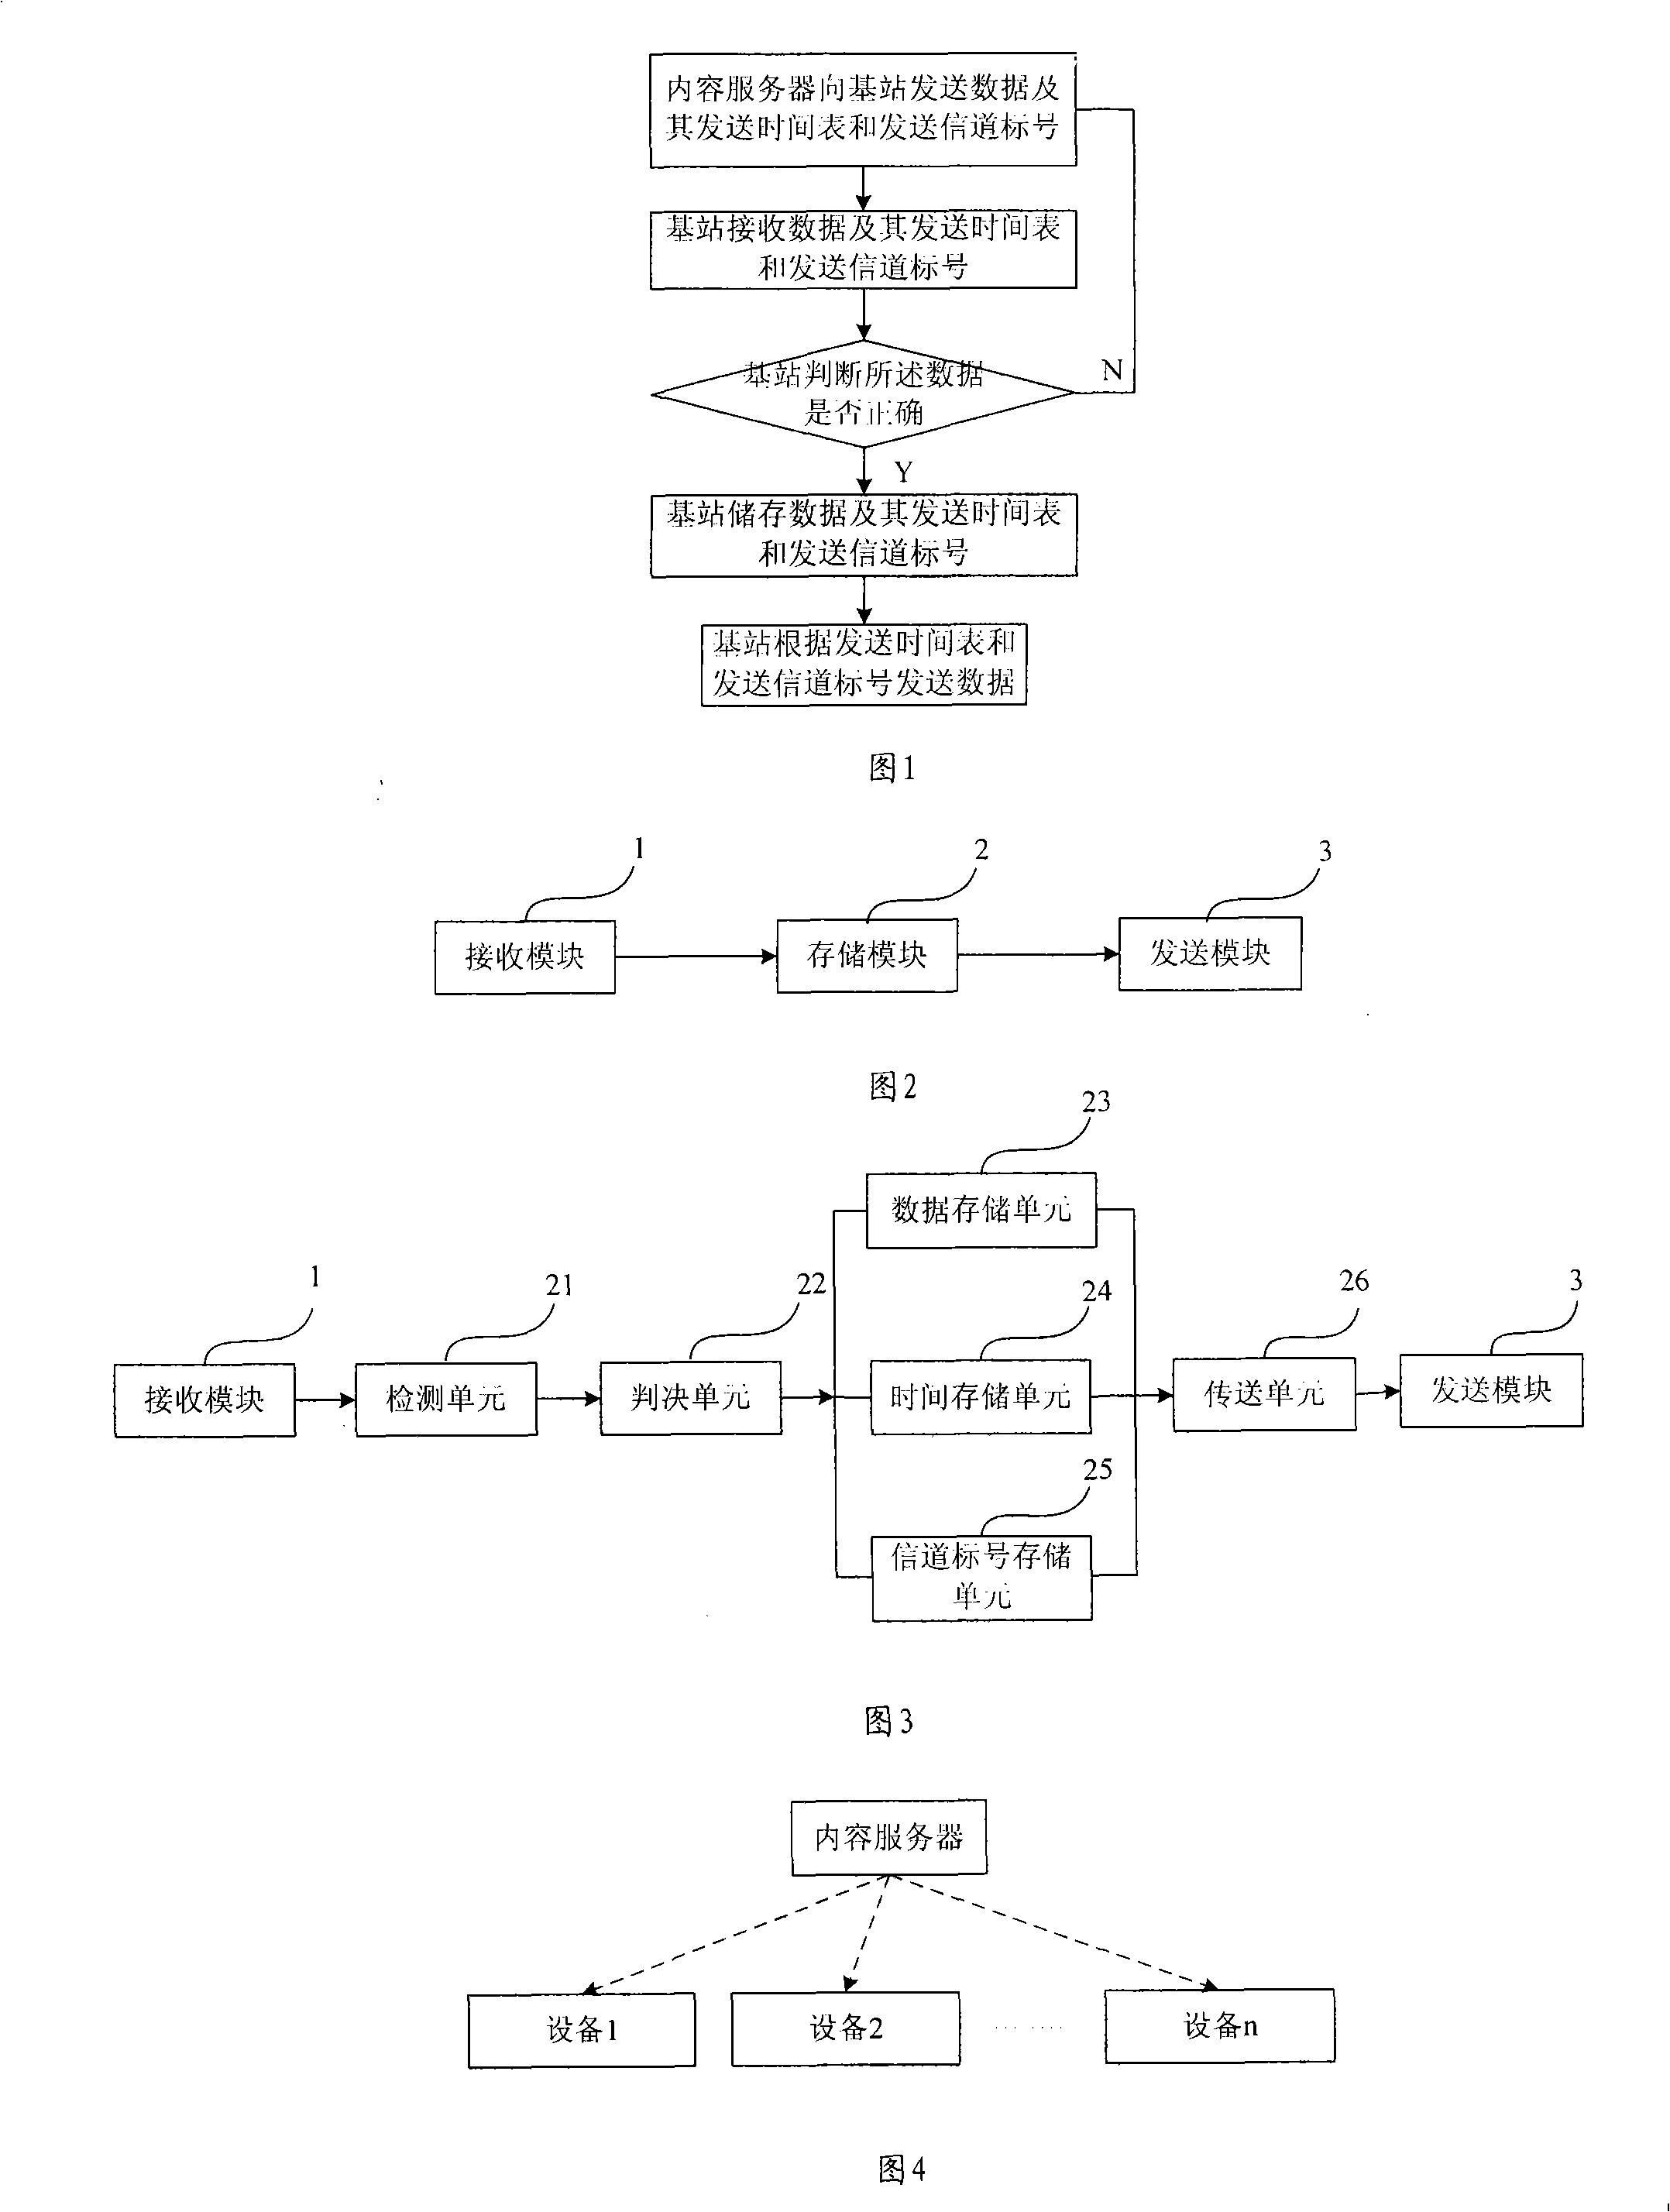 Method, apparatus and system for data synchronization between base stations